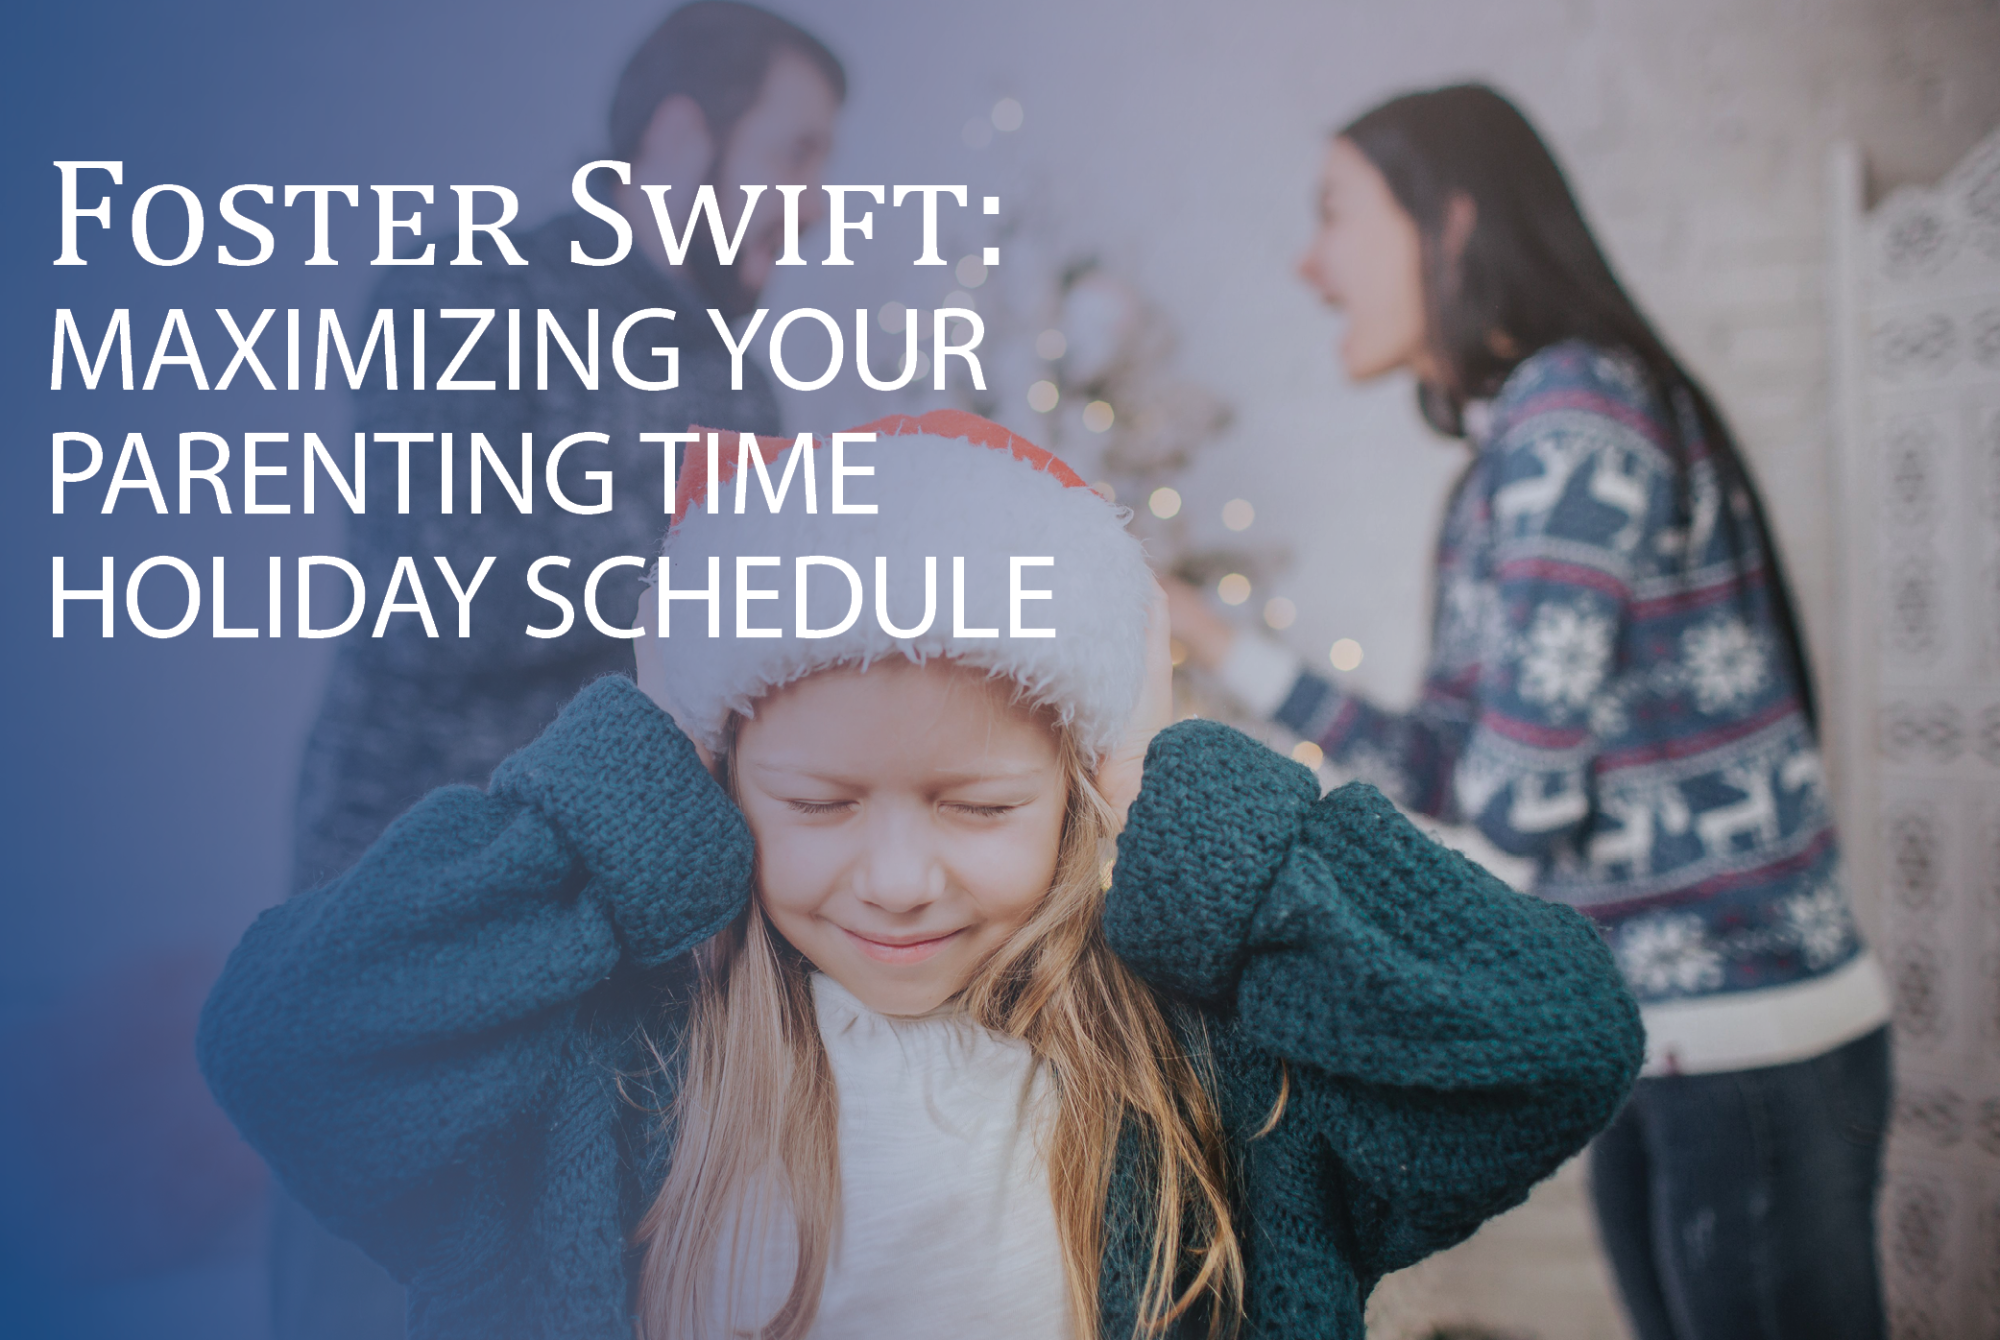 Parenting Time Schedule During the Holidays